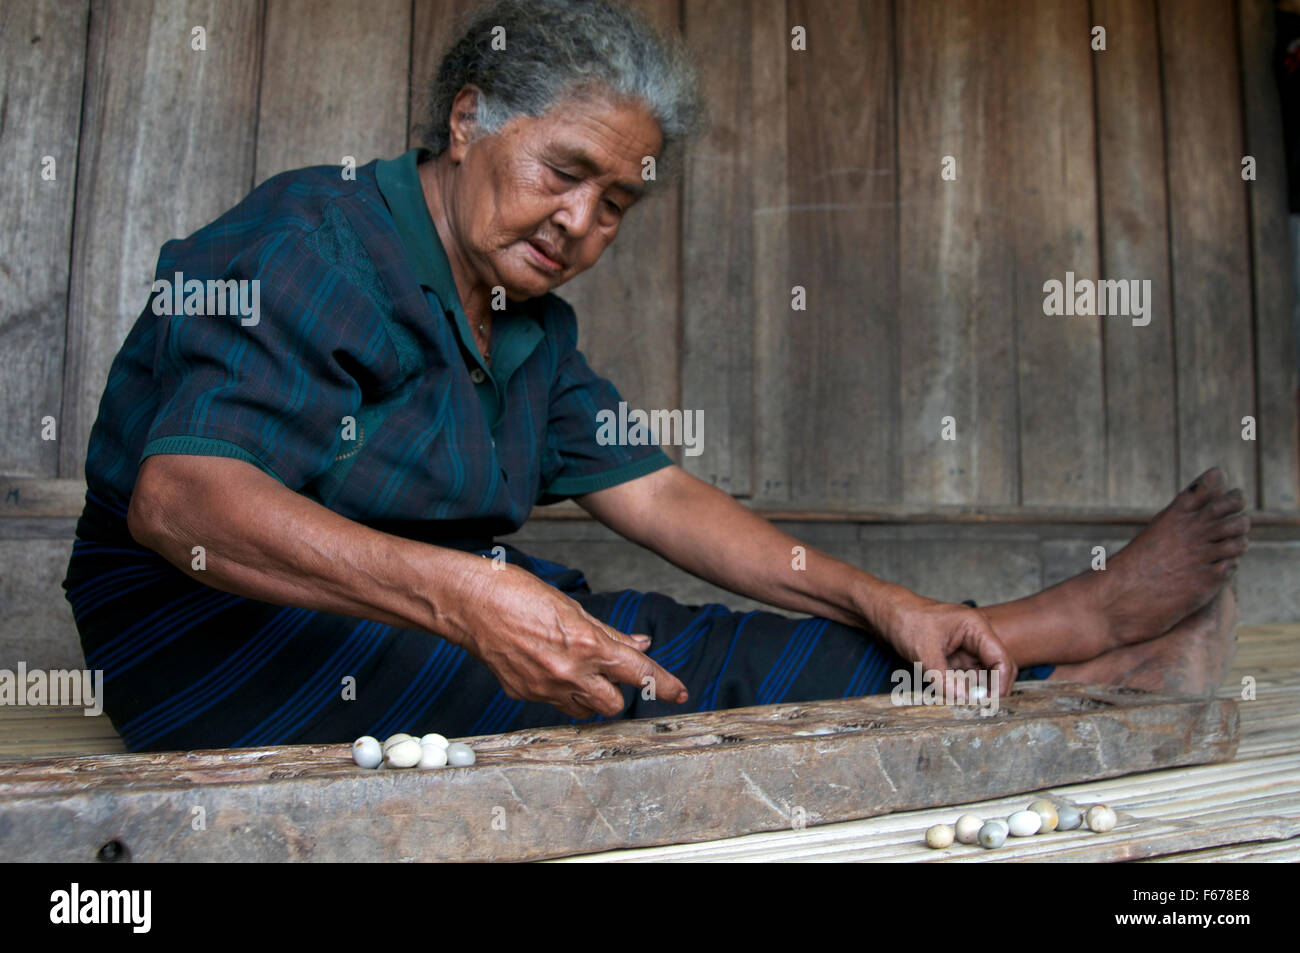 Woman playing the traditional game congkak Stock Photo